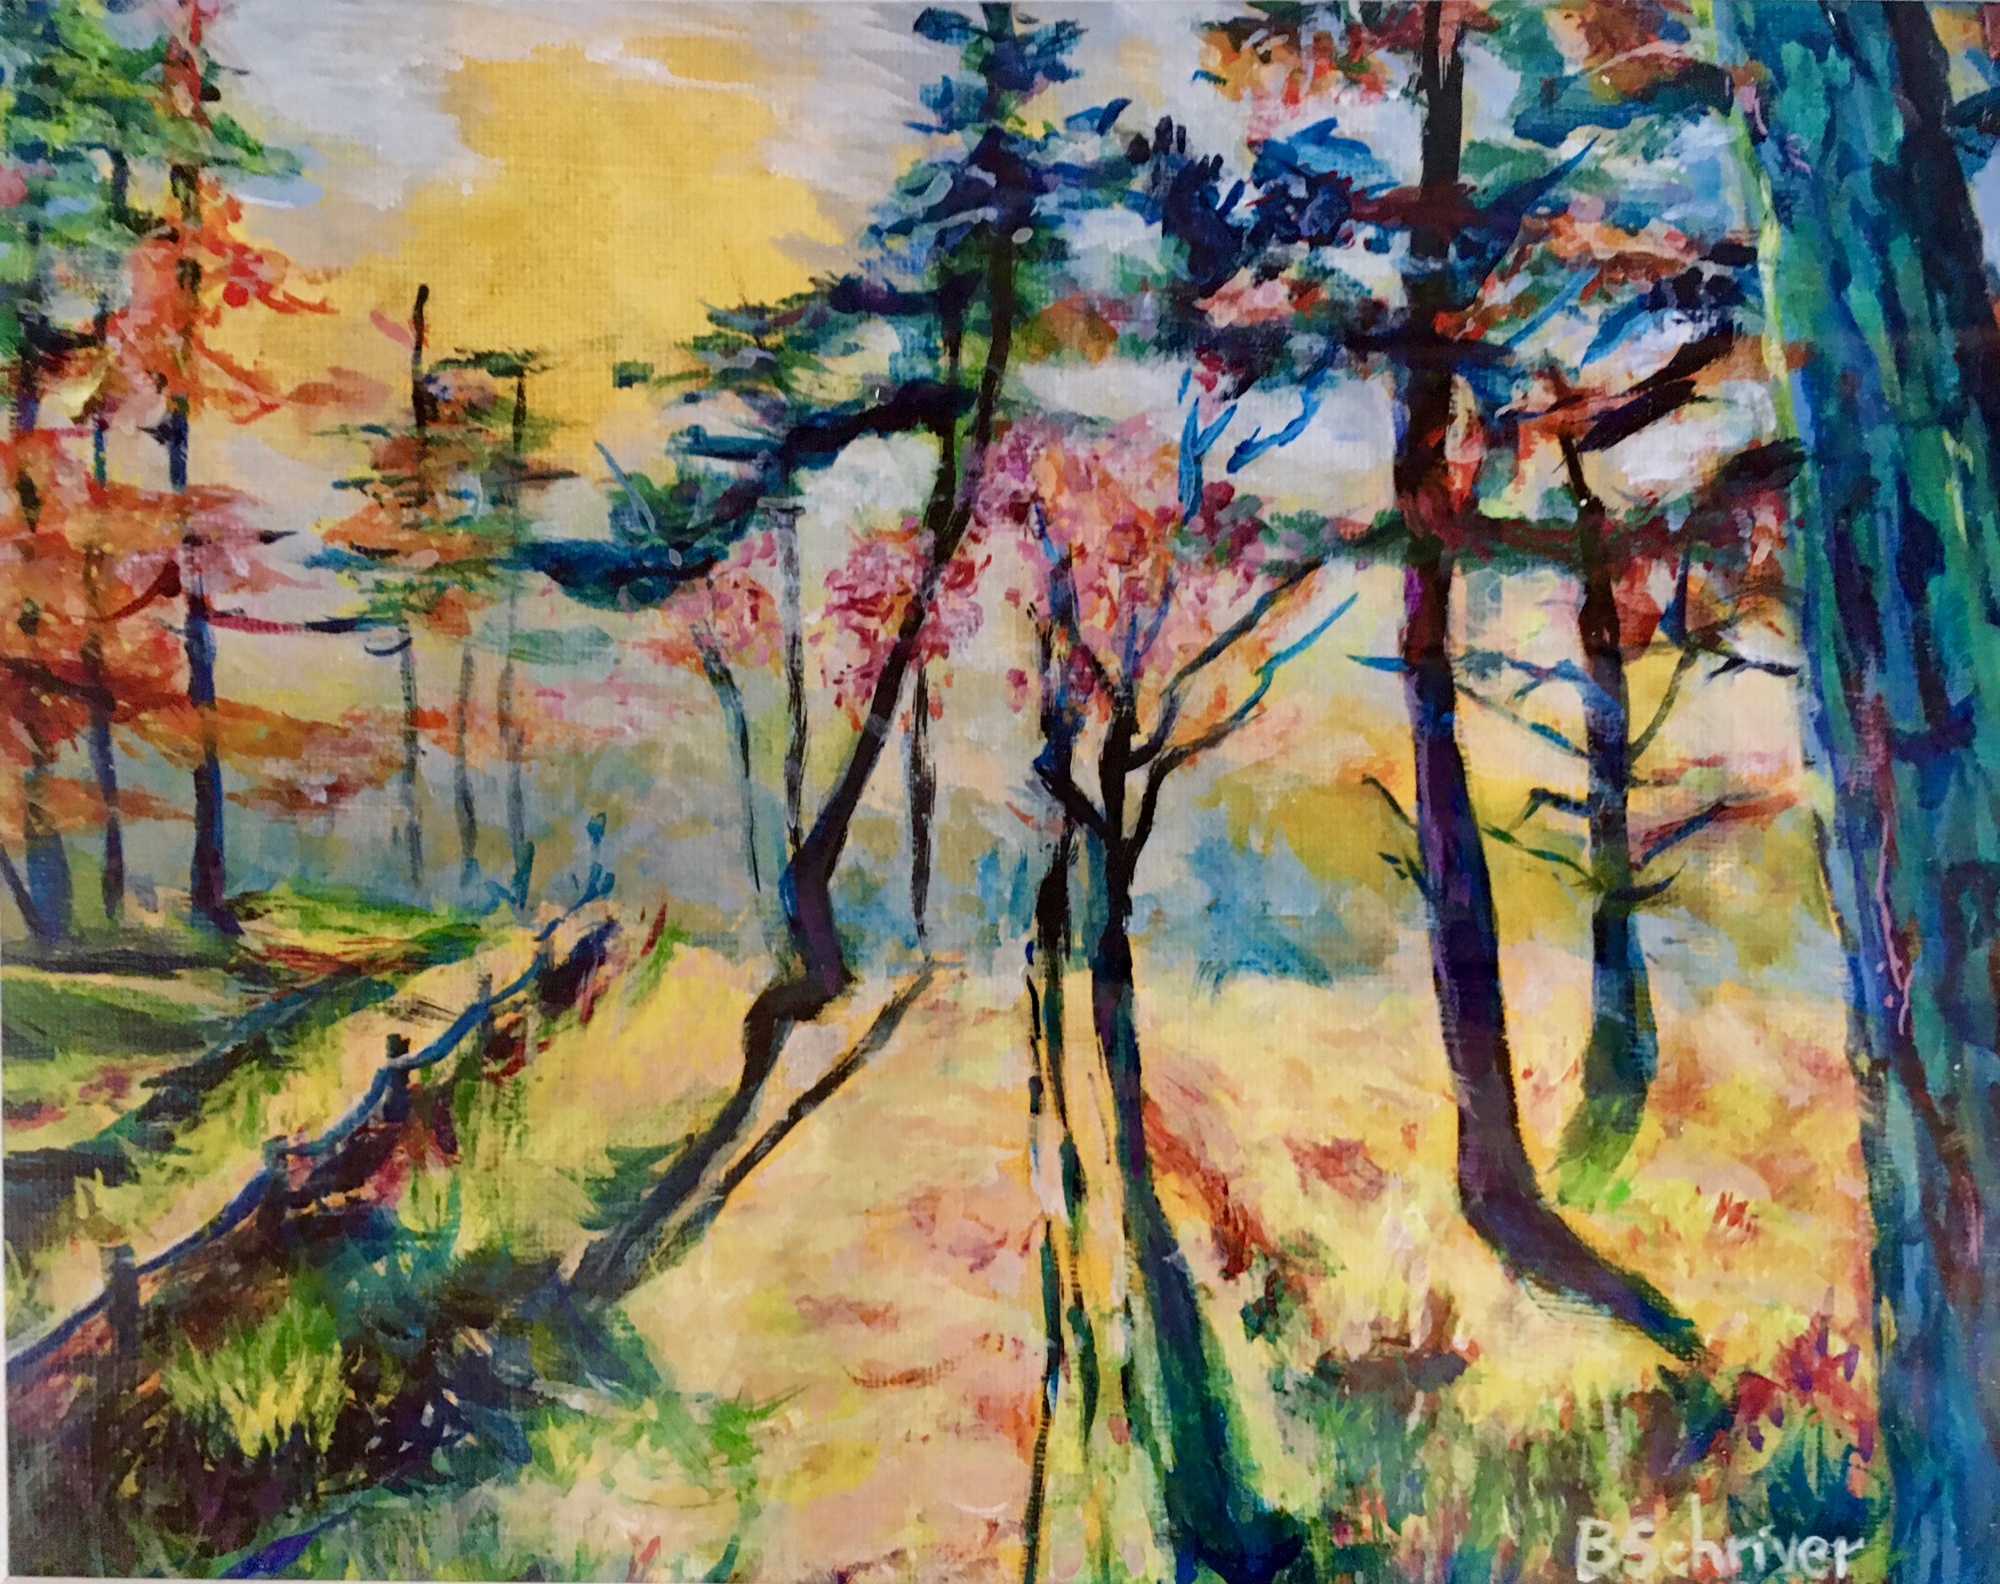 Betty Schriver - Shadows in the Woods (photo ref Ian Woods)